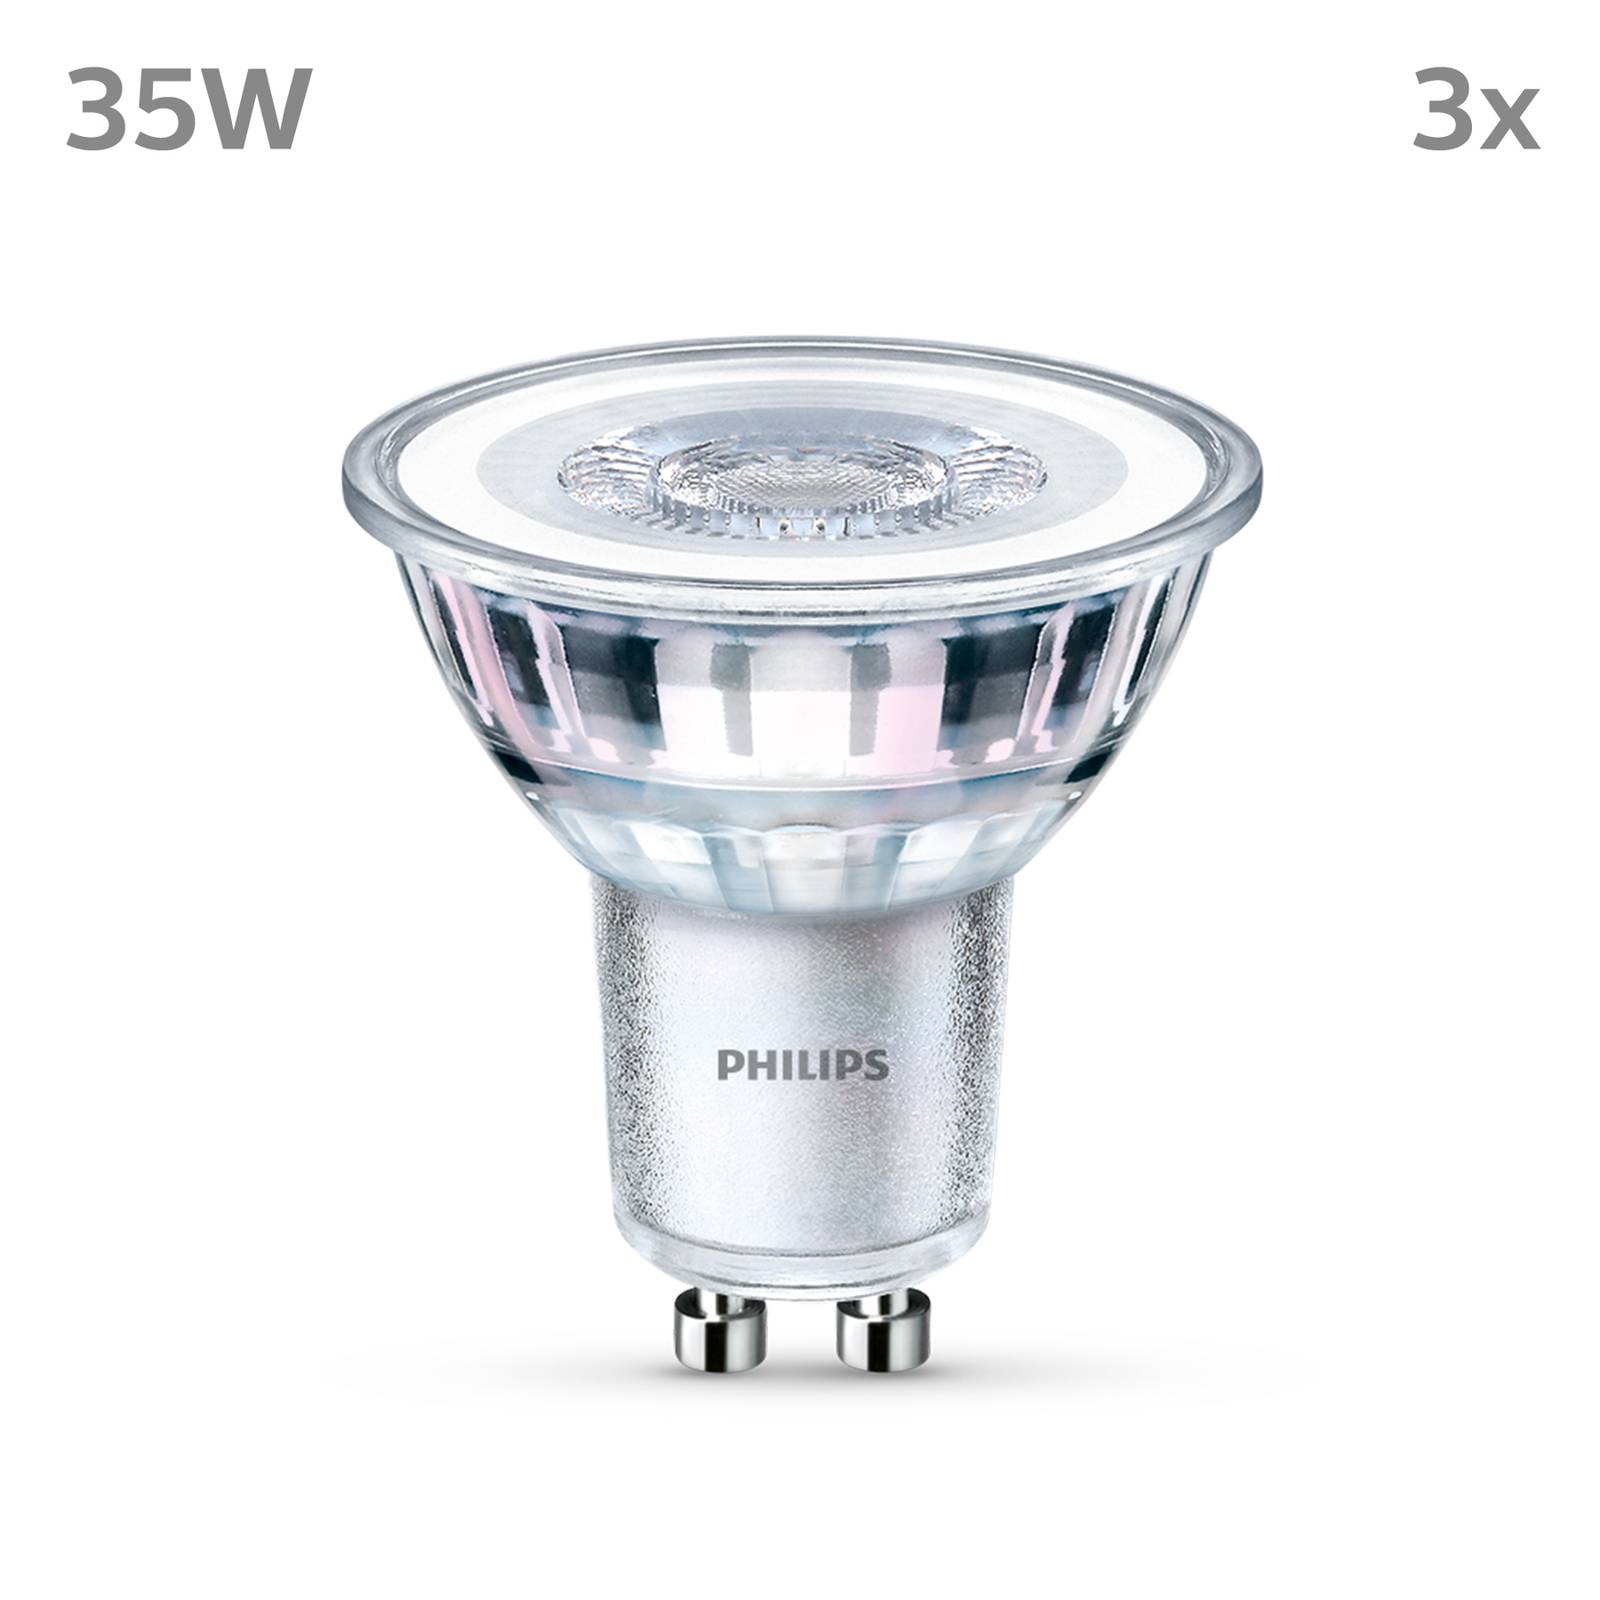 Philips LED GU10 3,5 W 275 lm 840 claire 36° x3